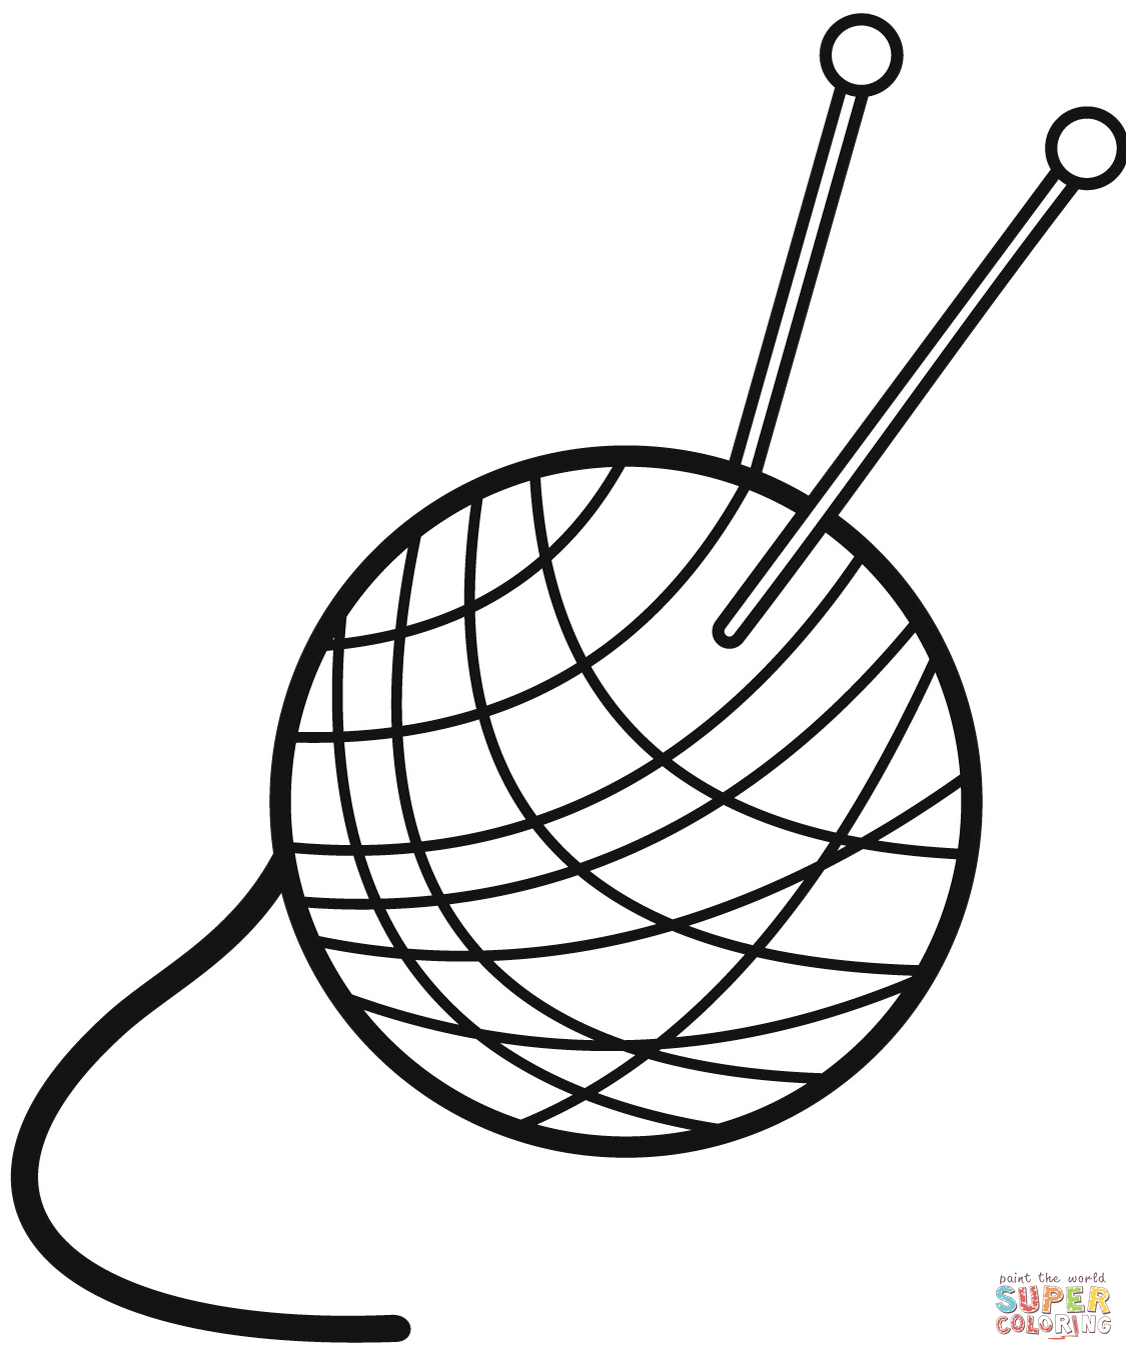 Knitting coloring page | Free Printable Coloring Pages